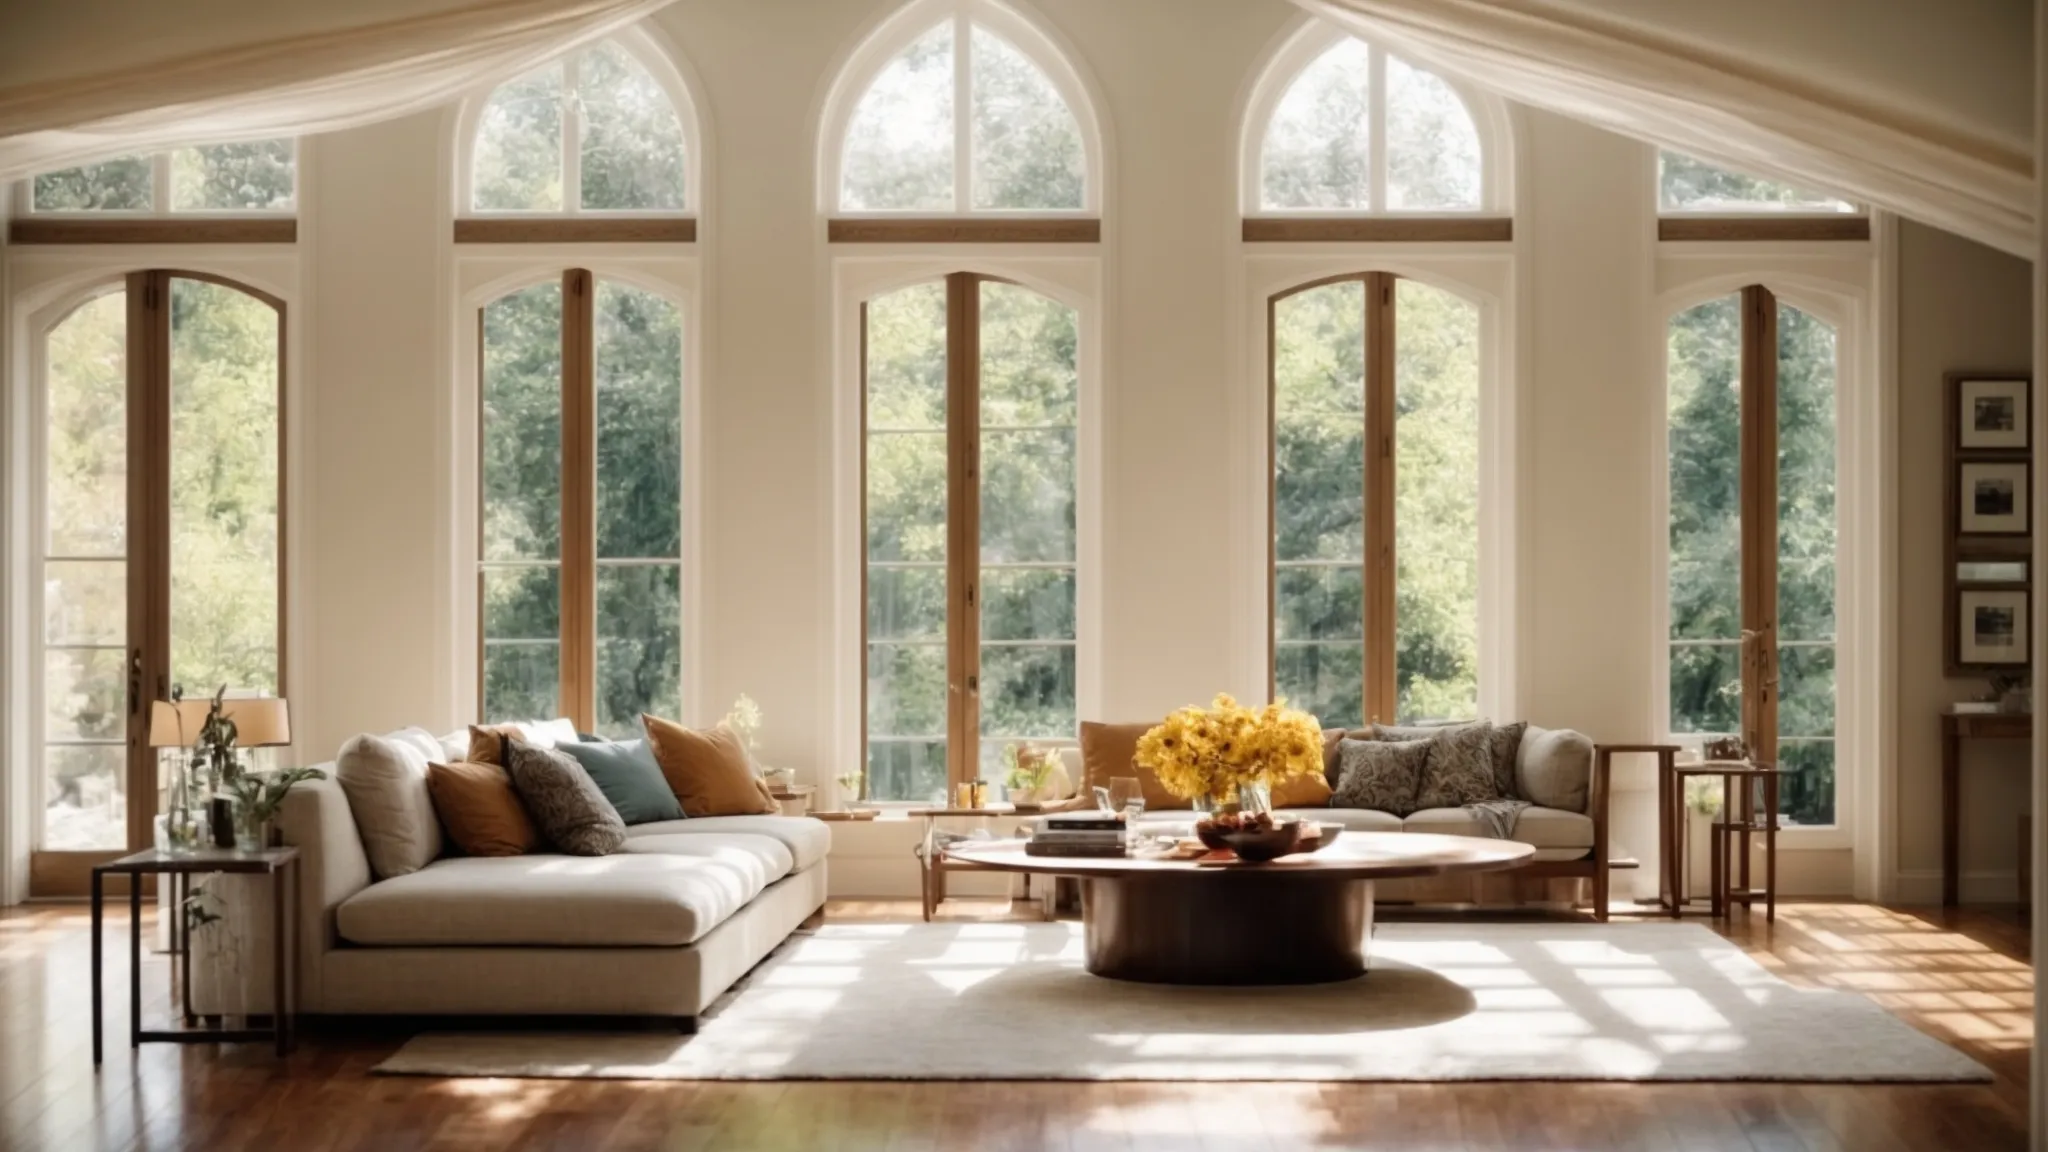 a wide, sunlit living room with two distinct types of elegant windows showcasing varying frame designs and color schemes, inviting comparison.